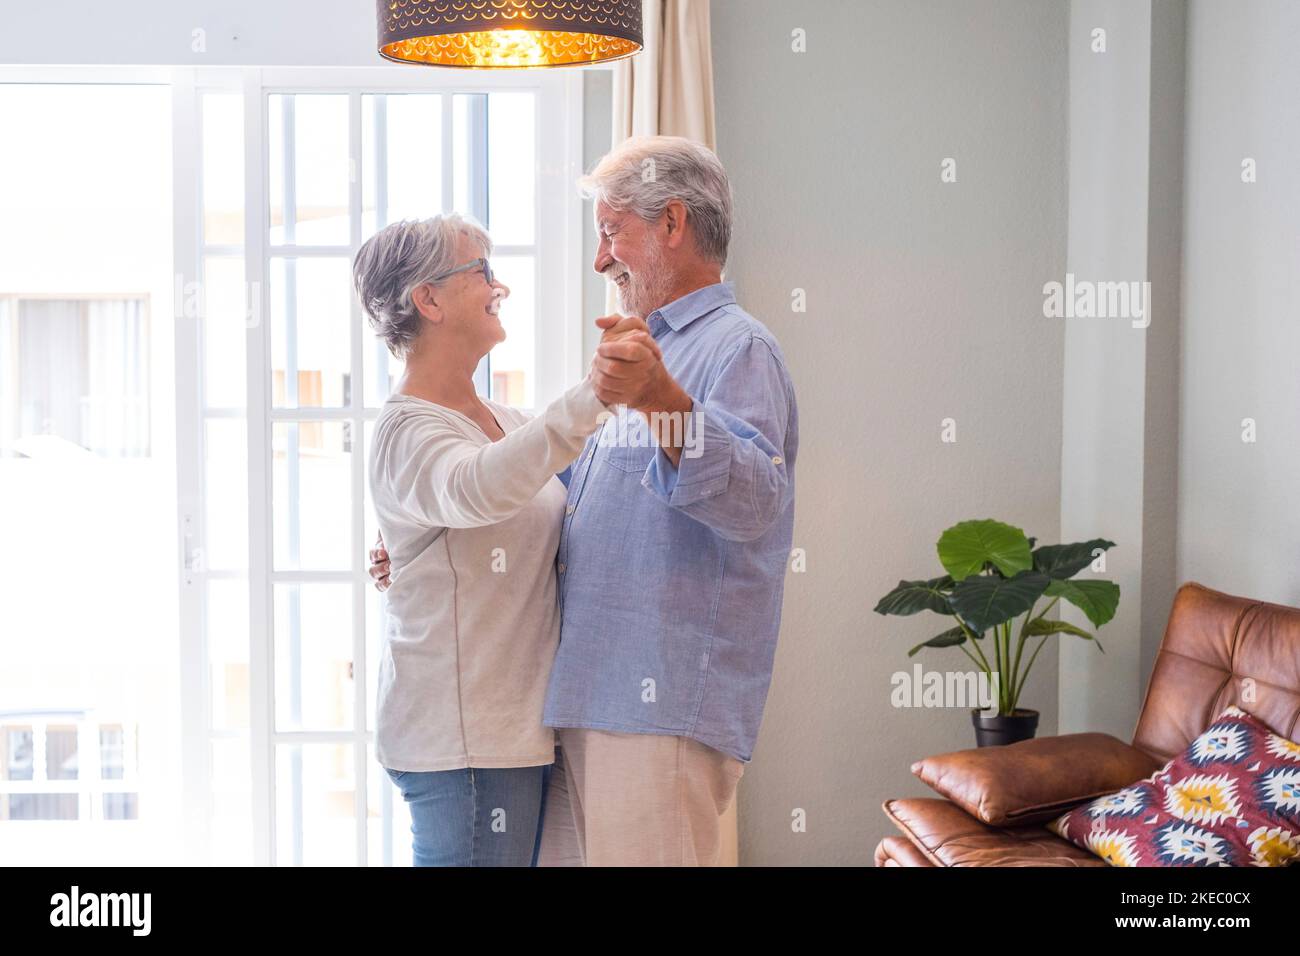 Romantic loving senior couple holding hands enjoying dancing together in the living room of house, Elderly happy couple celebrating by dancing in living room. Stock Photo